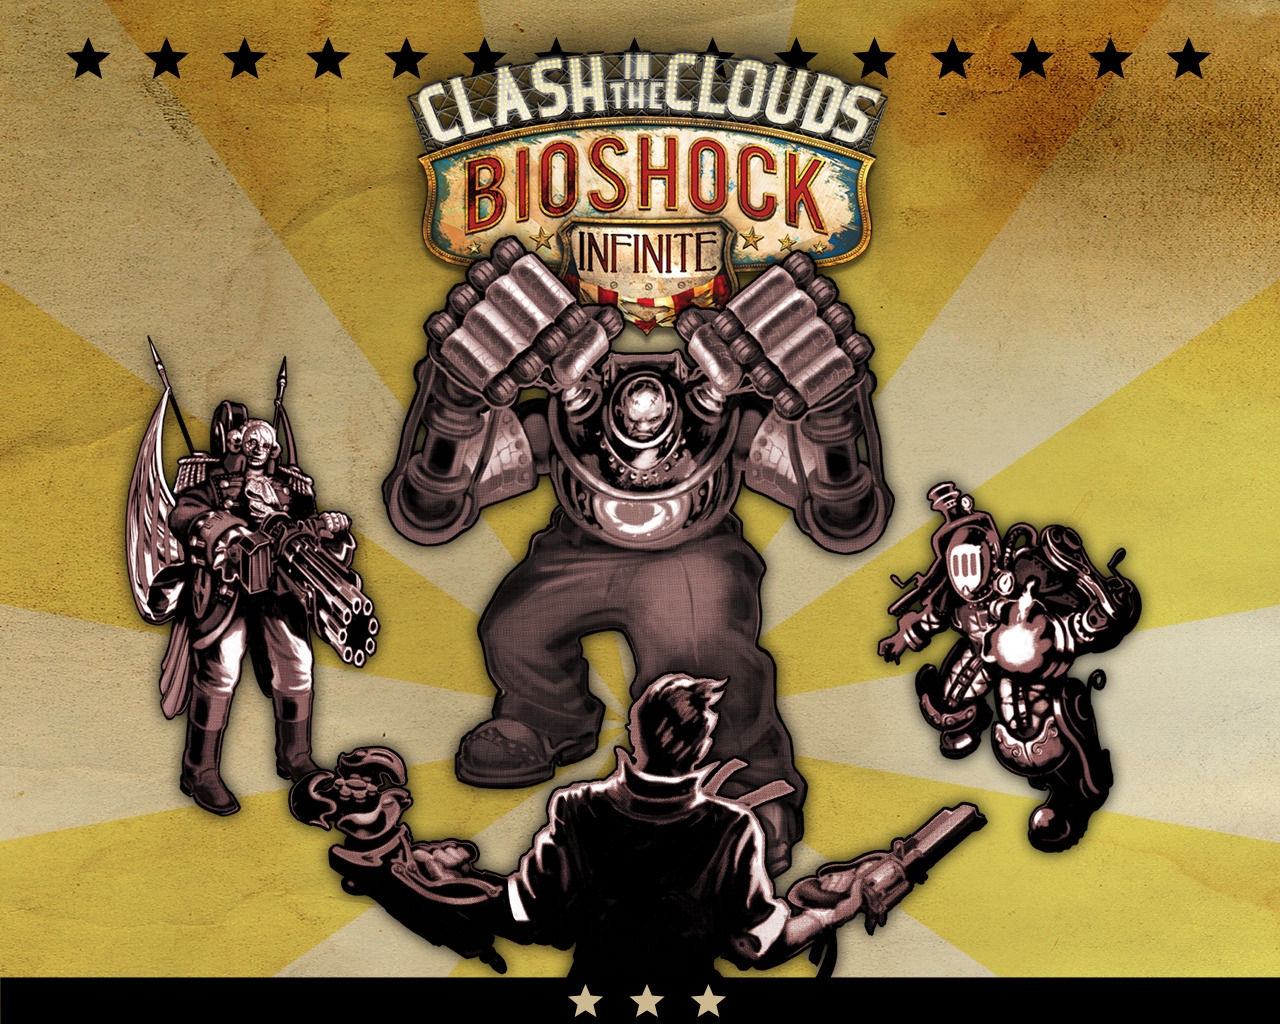 BioShock Infinite Clash in the Clouds for 1280 x 1024 resolution